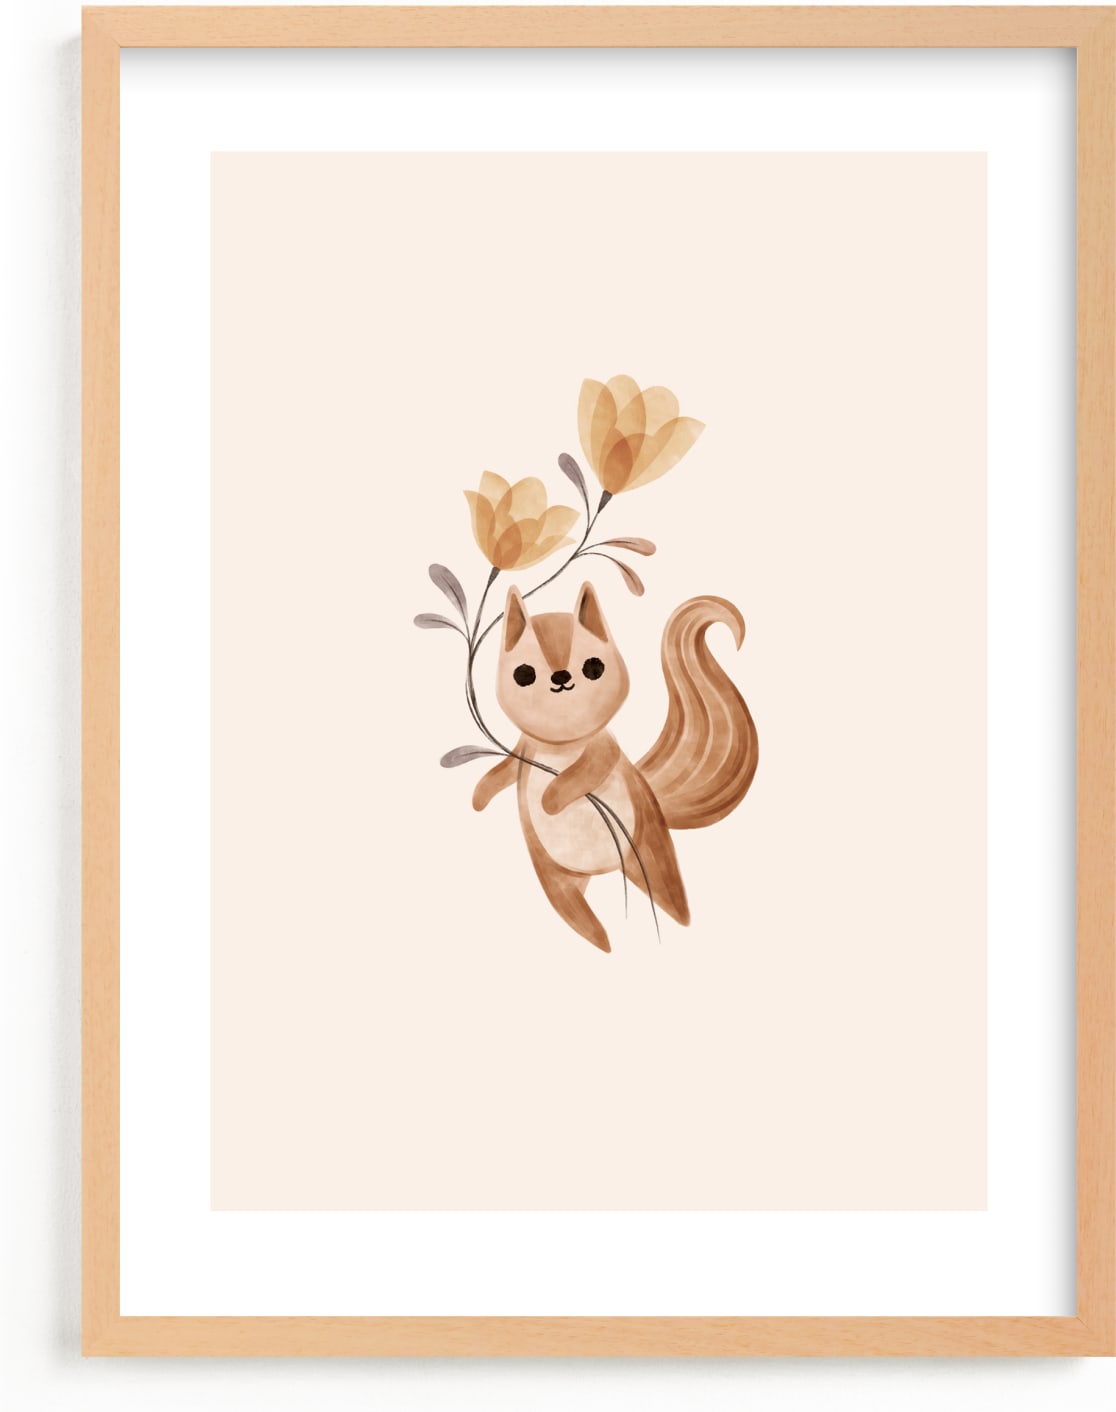 This is a brown, beige nursery wall art by Vivian Yiwing called squirrel with flowers.